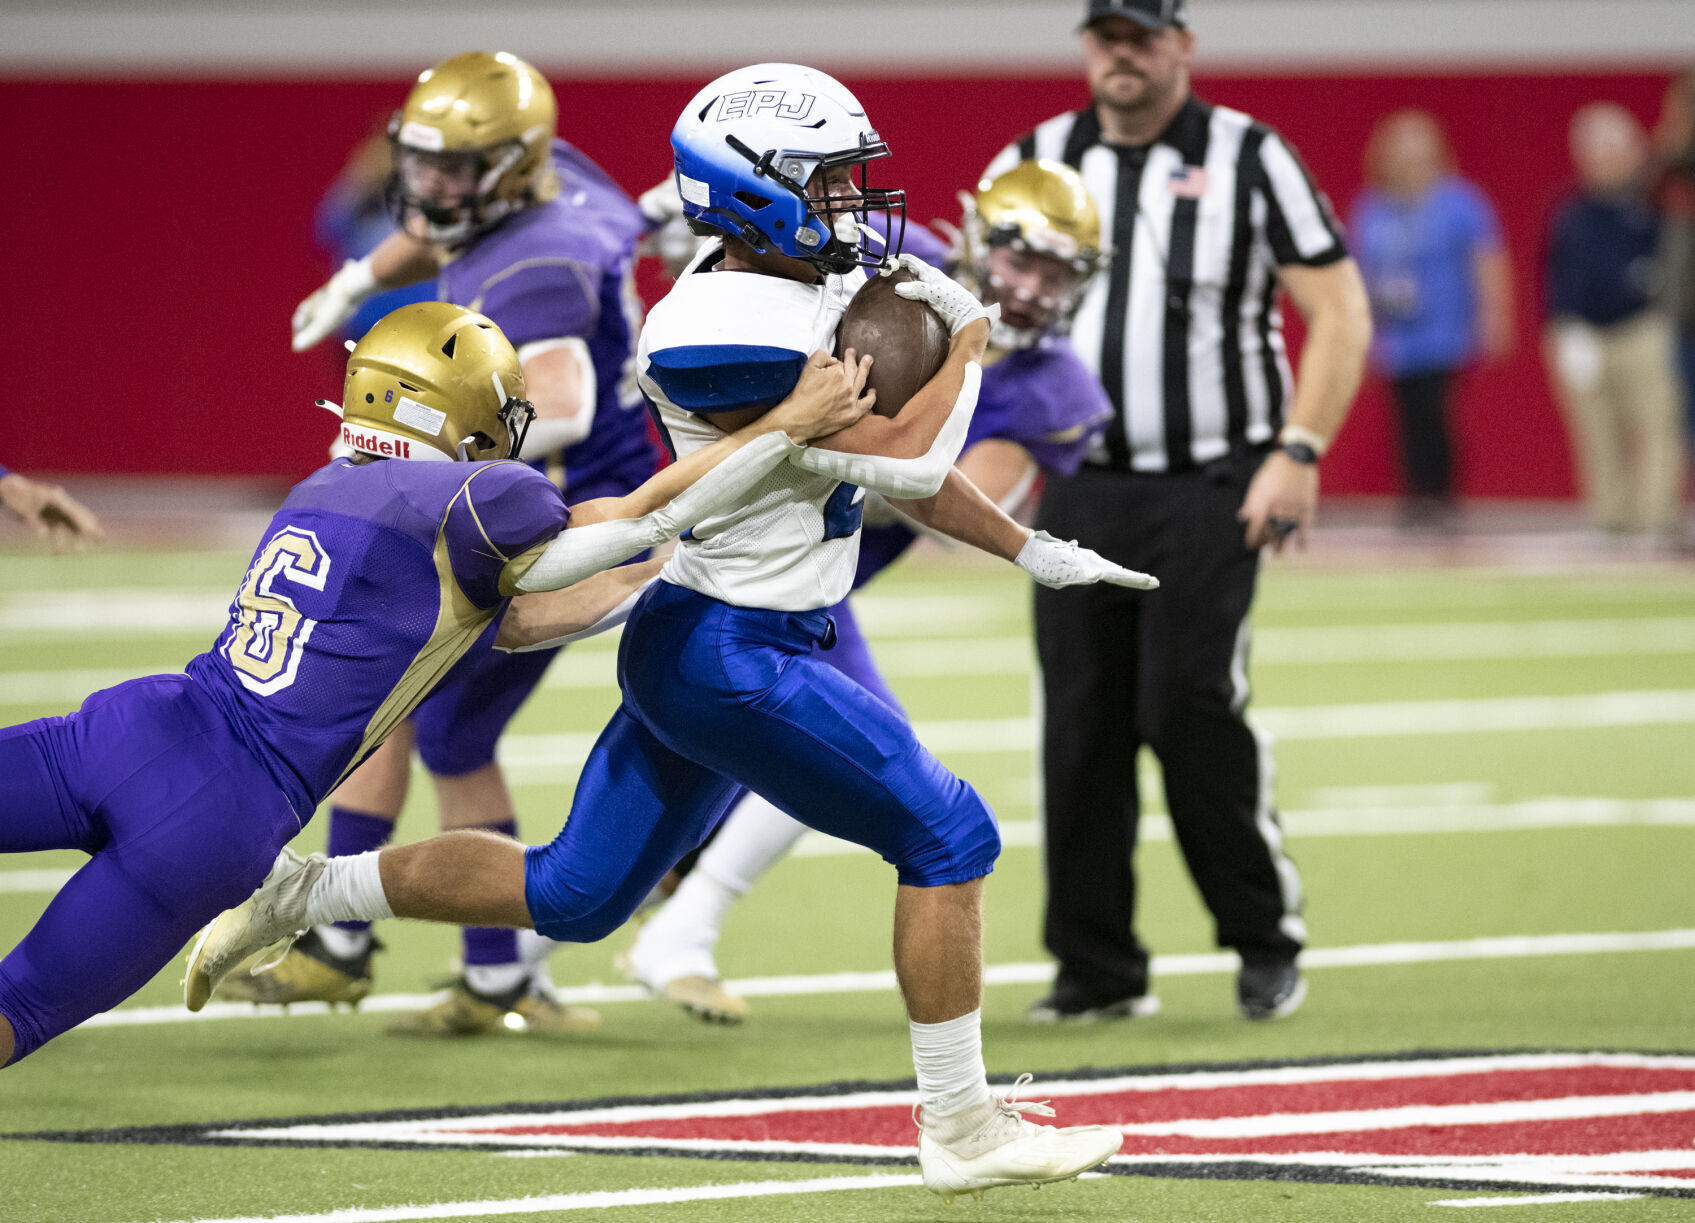 PHOTOS: 2022 SDHSAA 11B football state championship with Elk